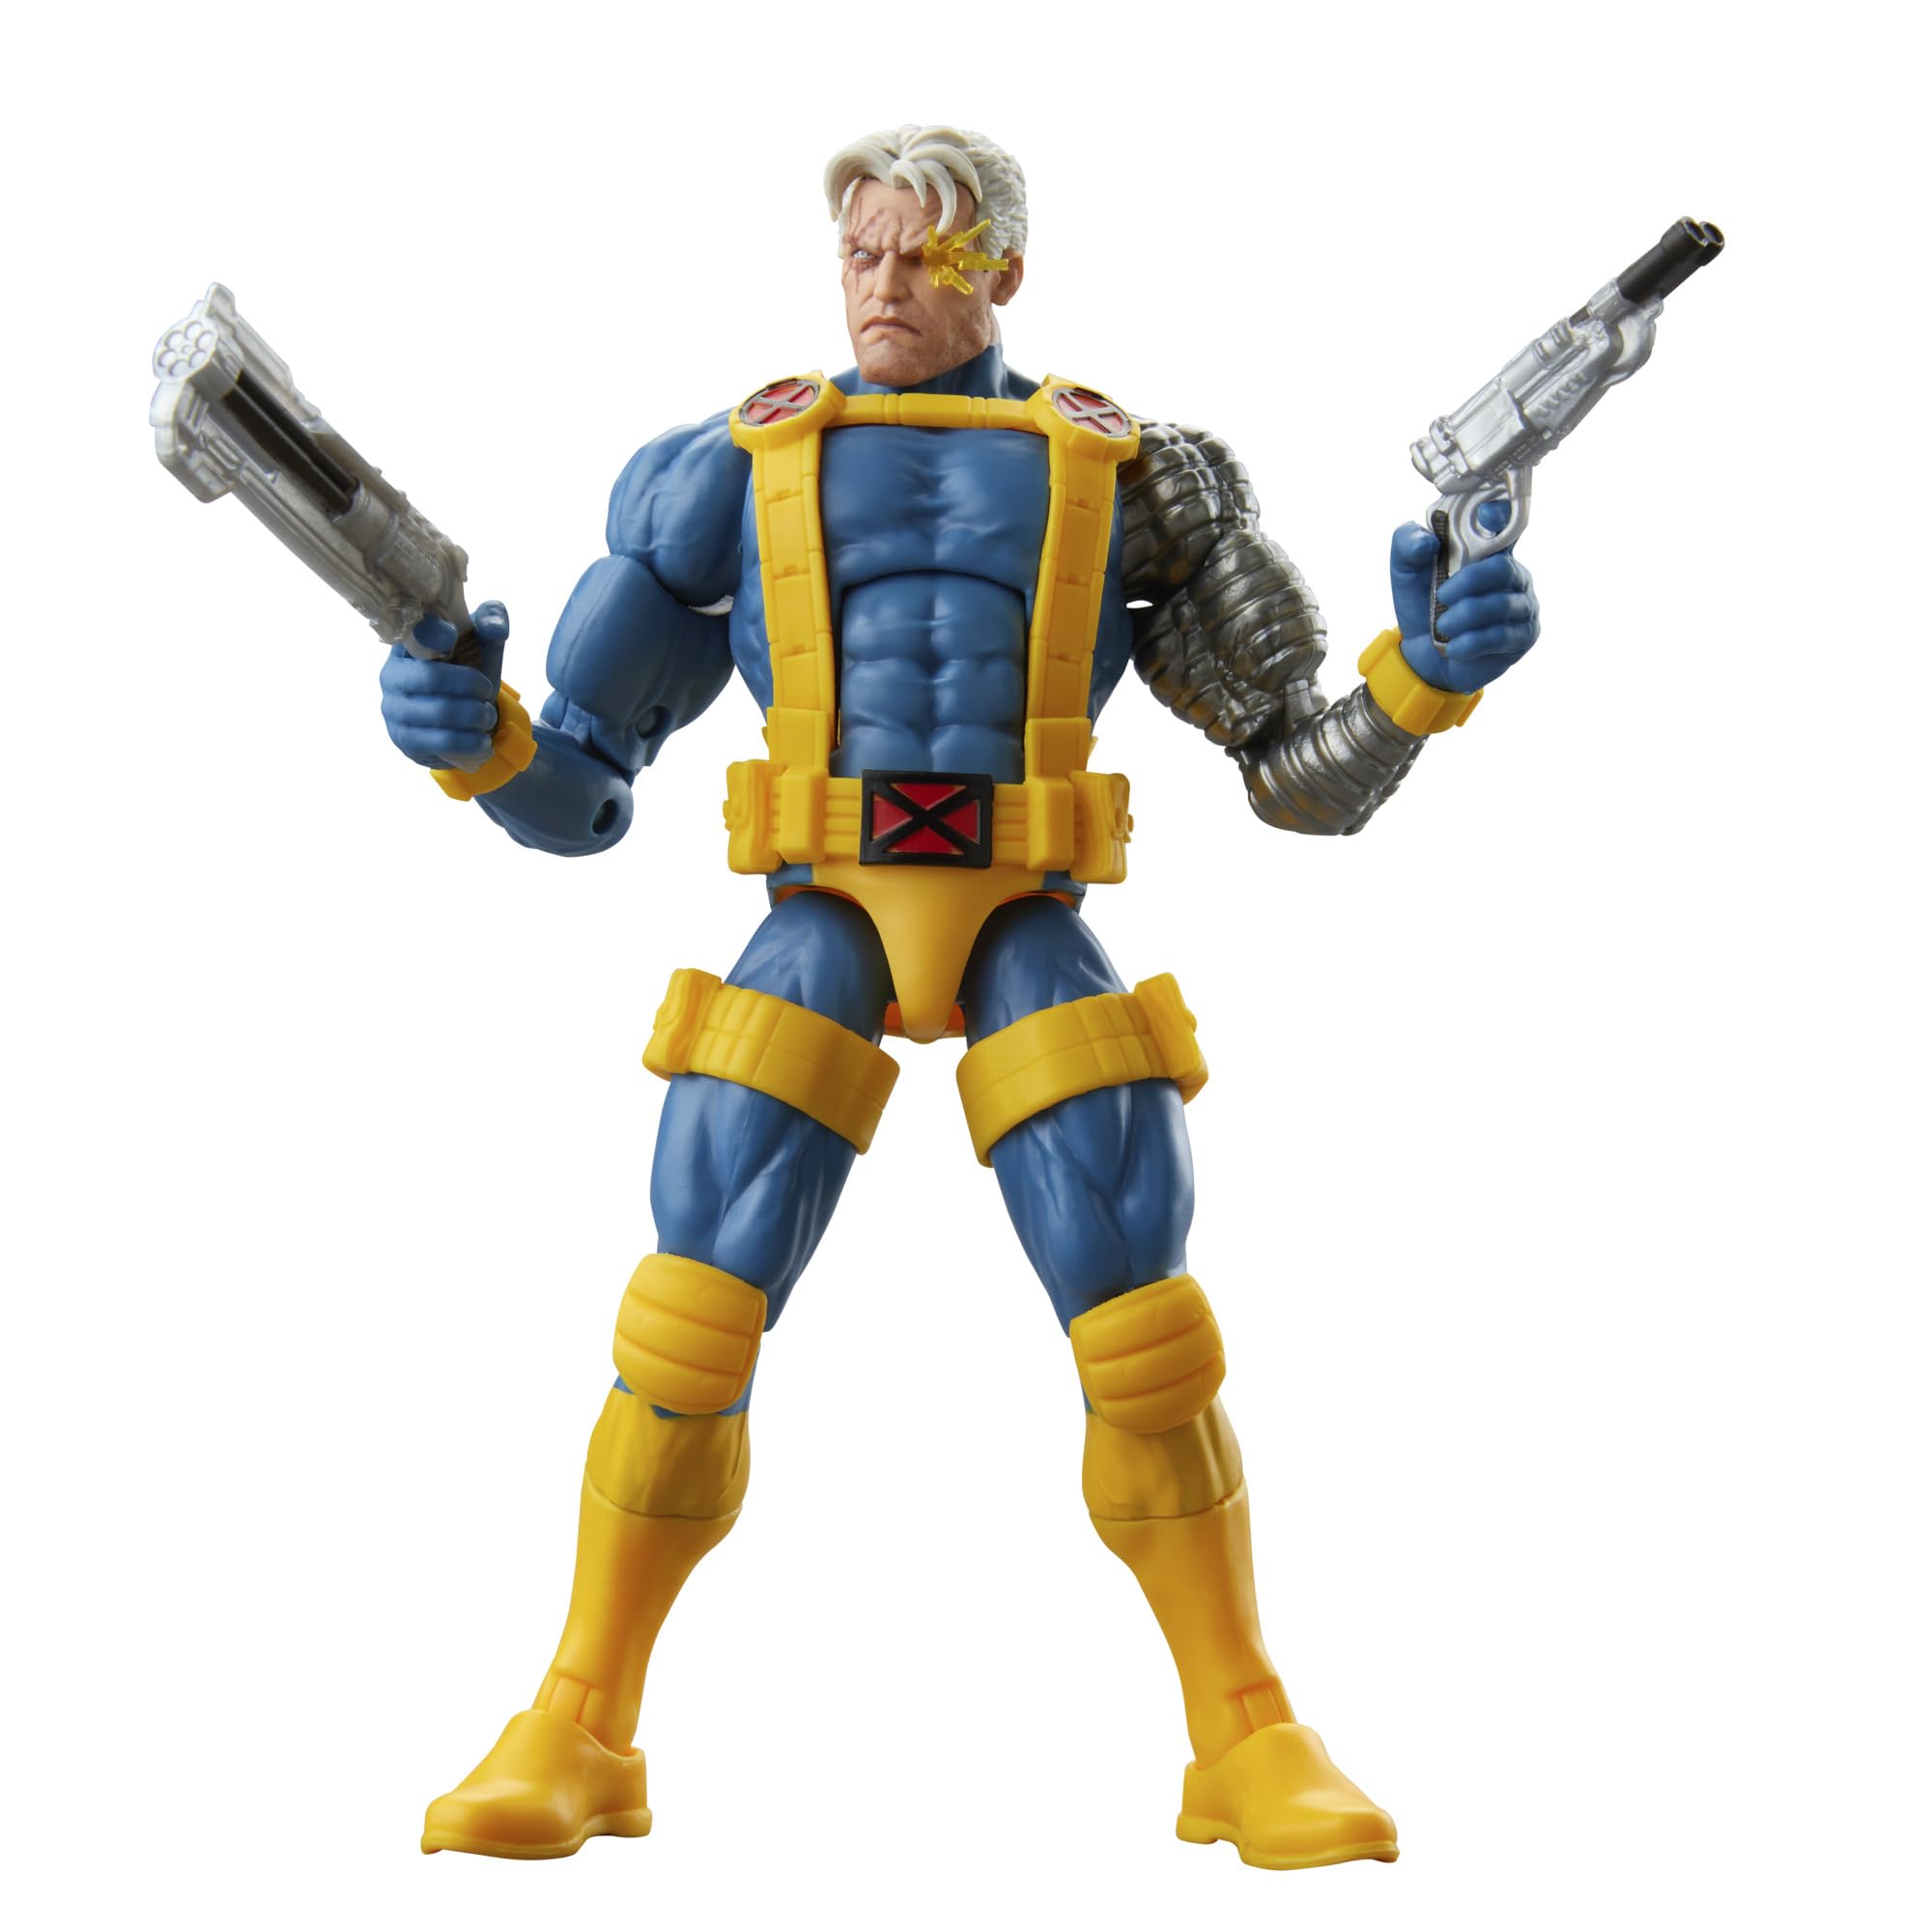 Marvel Legends Series Cable, Comics Collectible 6-Inch Action Figure with Build-A-Figure Part